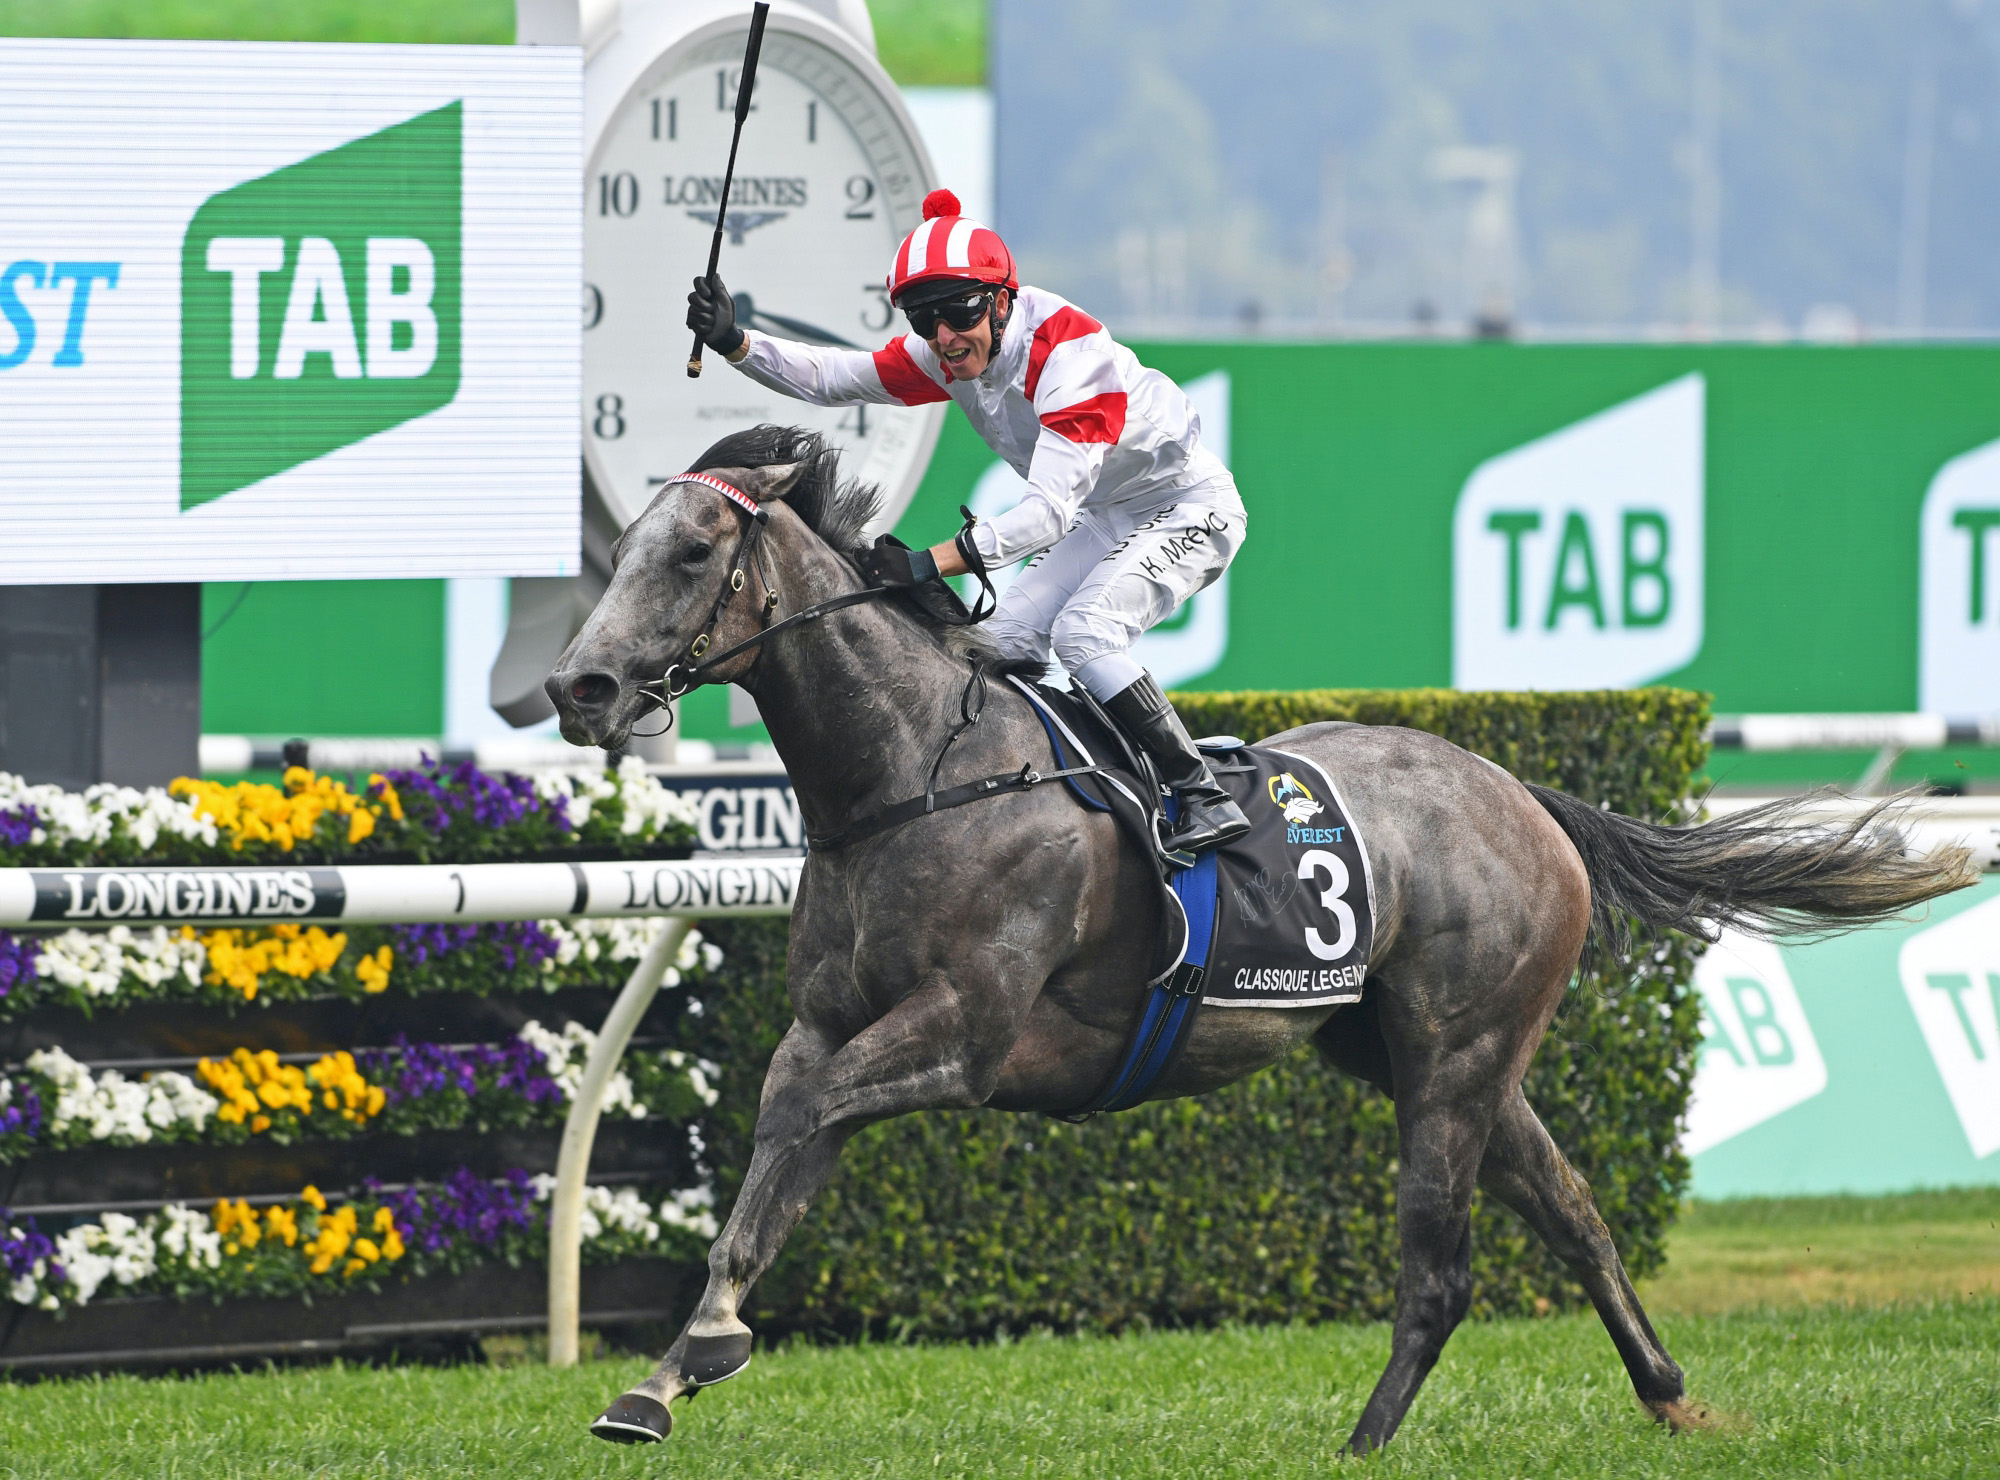 Classique Legend – HK : The Everest victor who beat seven individual G1 winners; a dual G2 winner in Australia who will race first-up for Caspar Fownes in the G1 LONGINES Hong Kong Sprint.